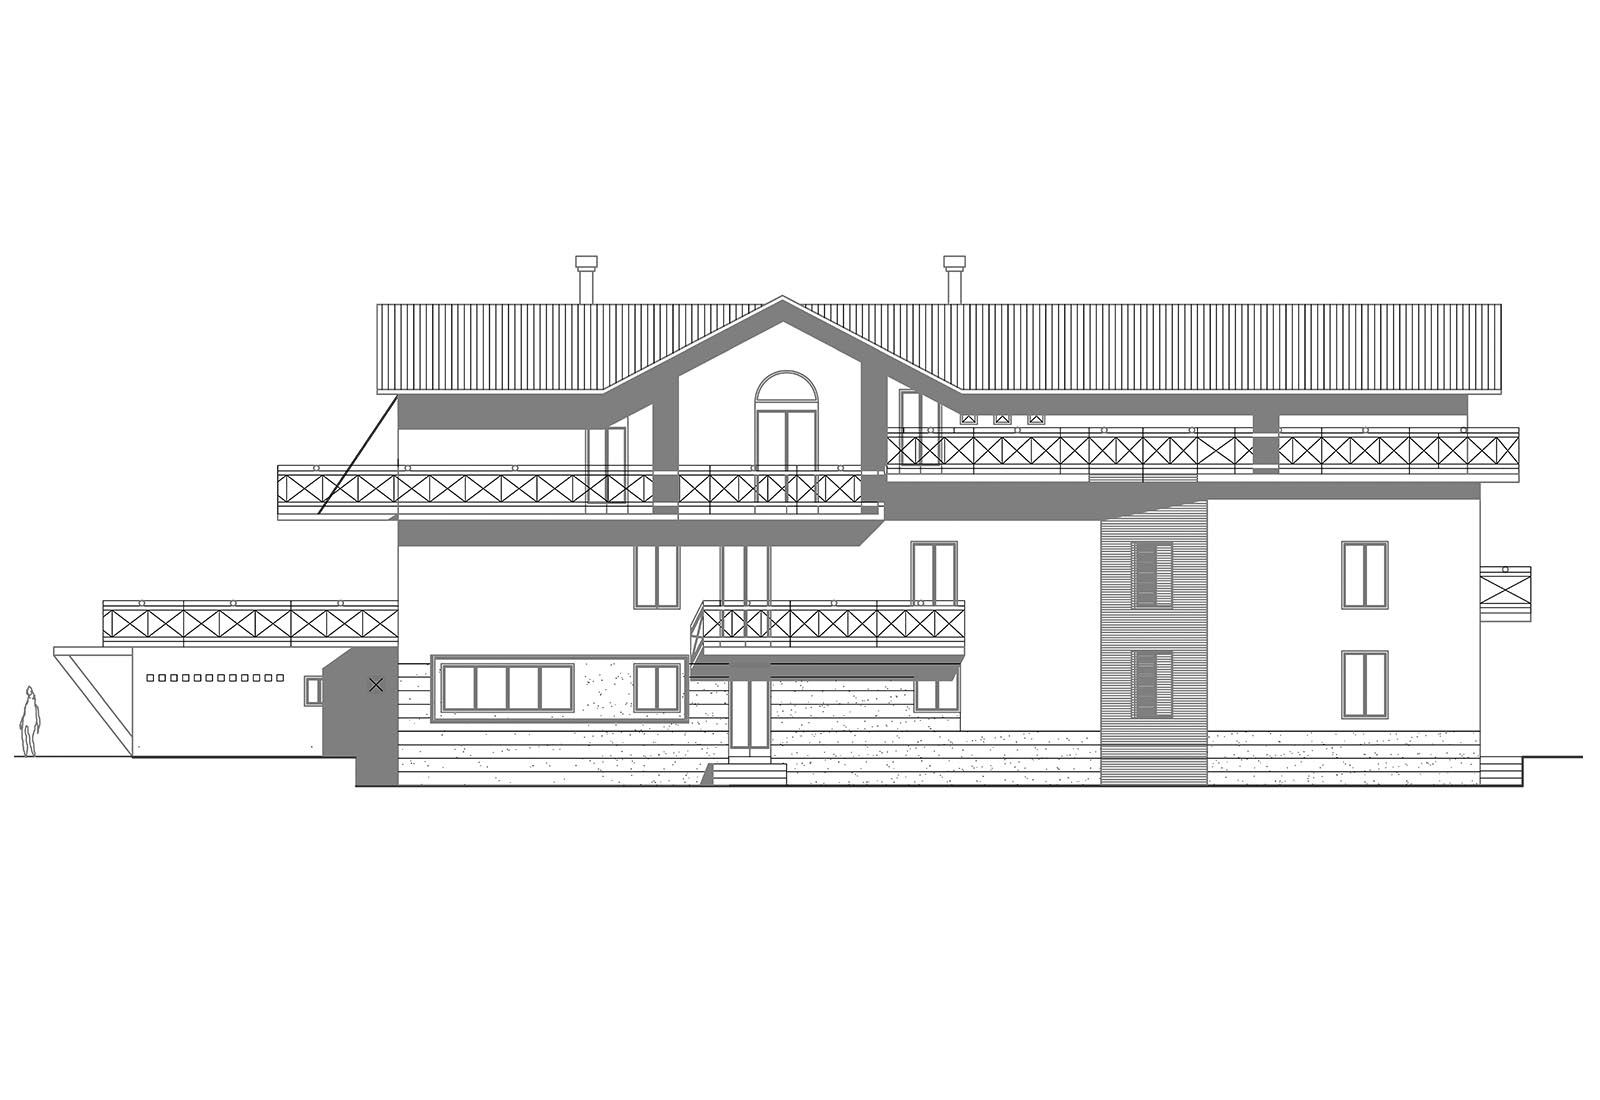 House extension in Giovanni XXIII street in Nerviano - North East elevation